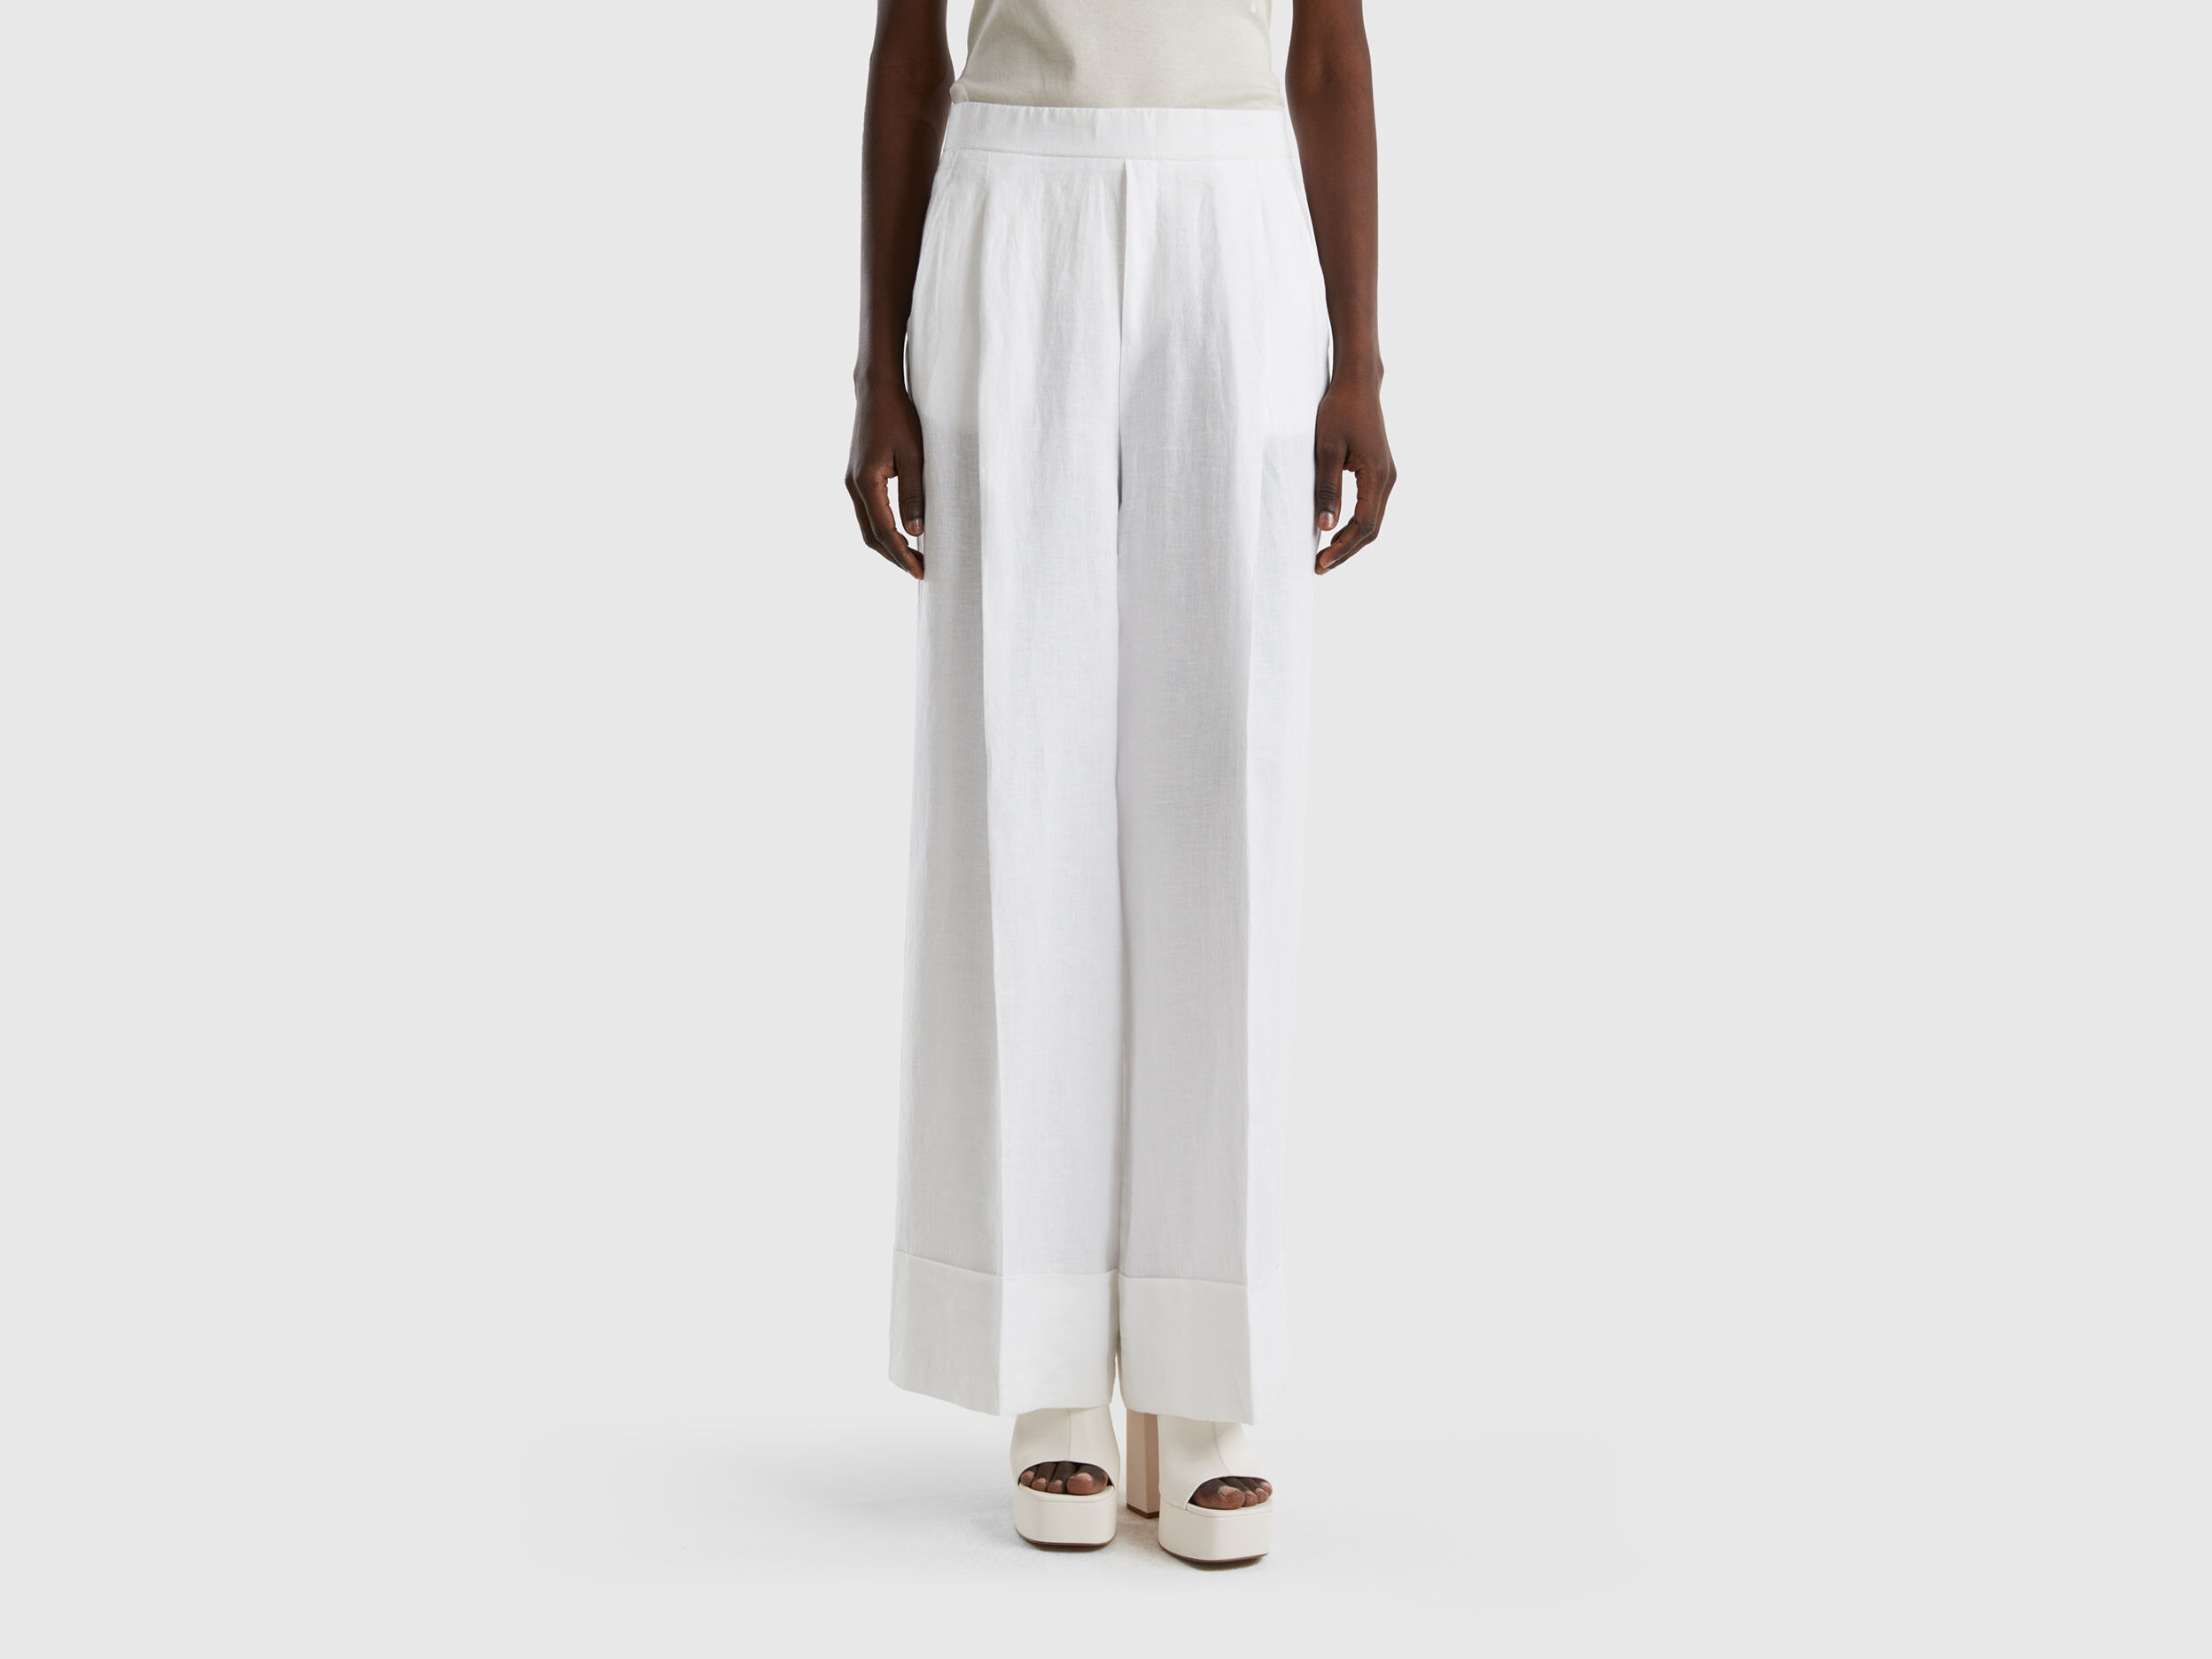 Women's Normal Ghera Palazzo - Off White - Normal Ghera Palazzo - Palazzo -  Bottomwear - Fabrika16